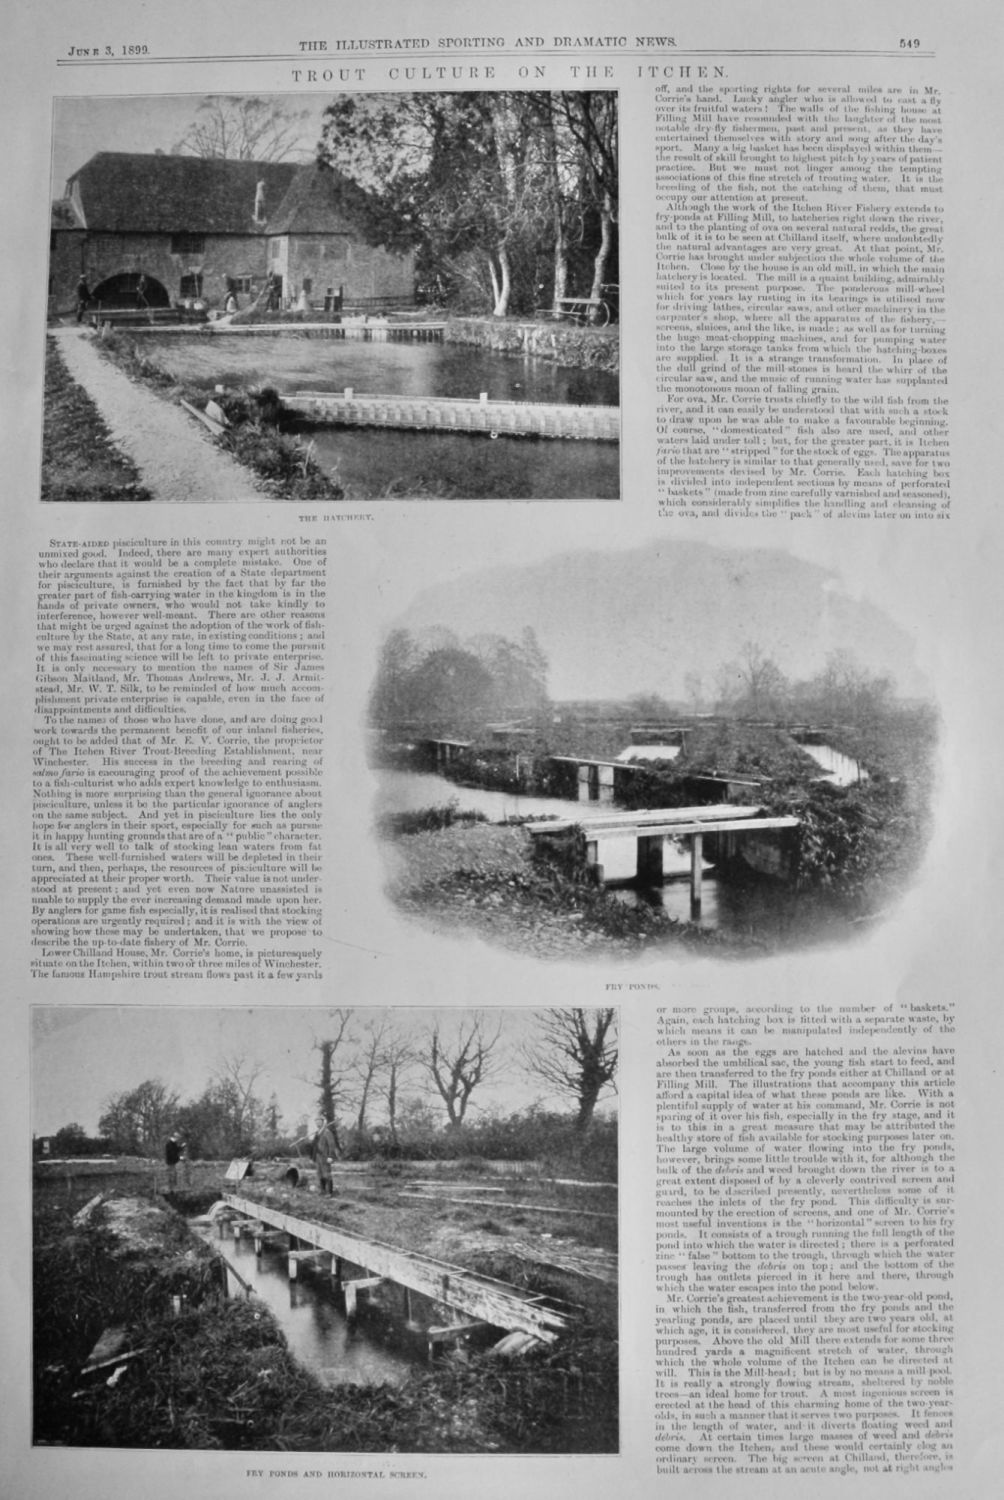 Trout Culture on the Itchen.  1899.